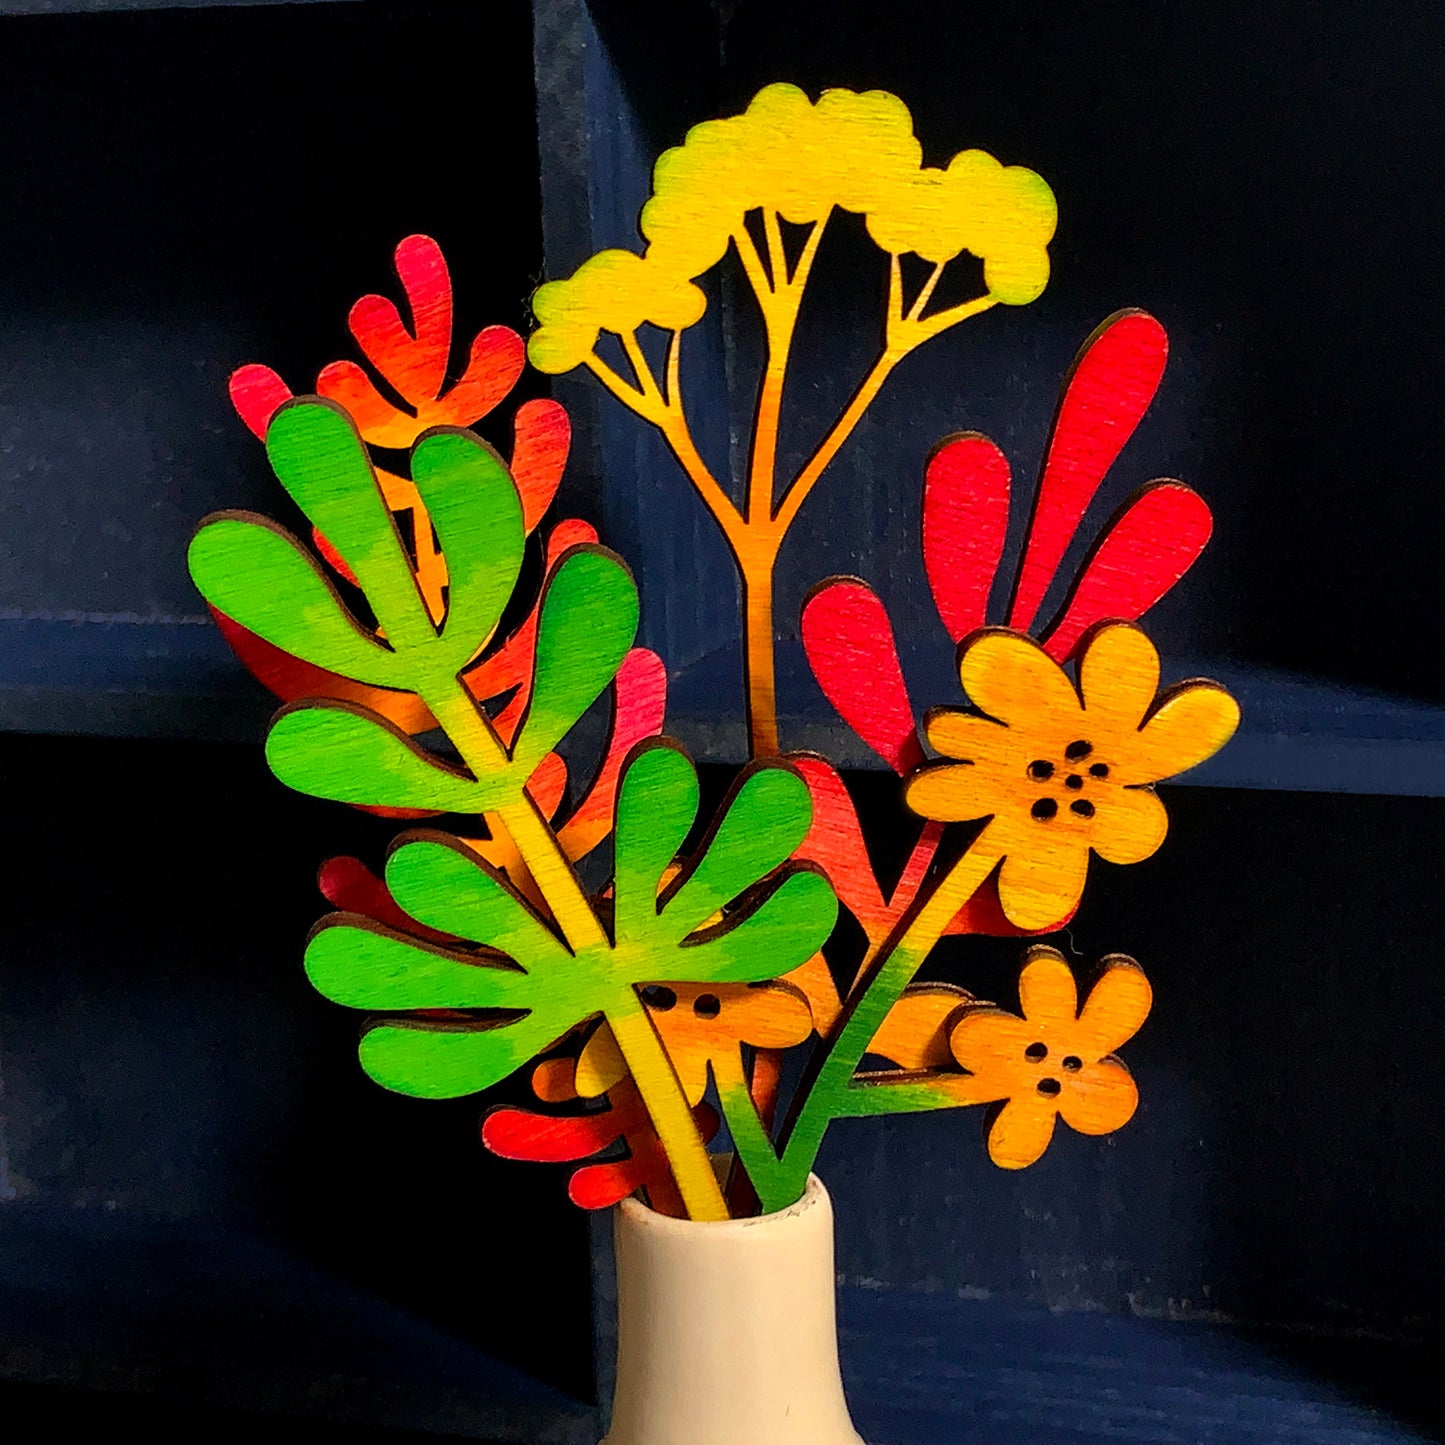 Vibrant Wooden Wildflowers for Home Décor (Set of 9)